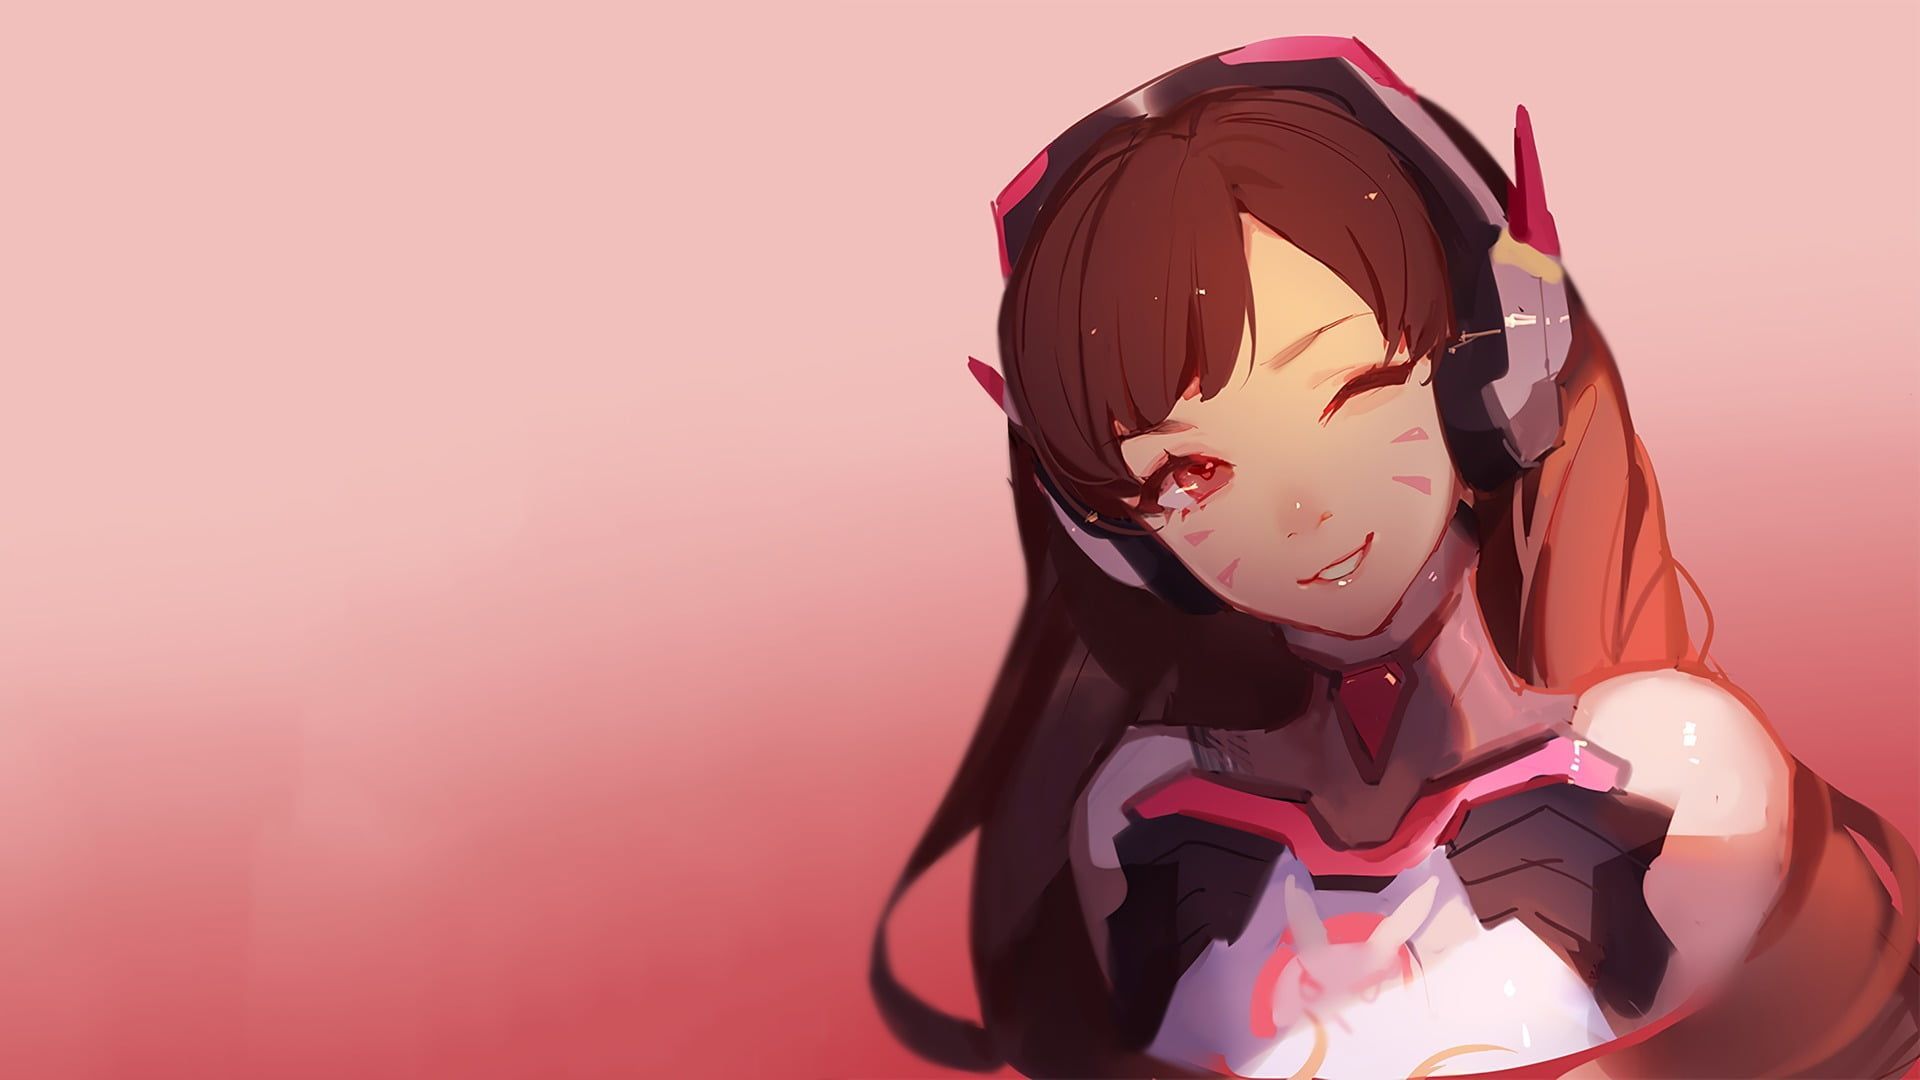 Red Haired Female Anime Character #Overwatch Video Game Characters D.Va (Overwatch) P #wallpaper #hdwallpaper #deskto. Overwatch Wallpaper, Anime, Overwatch